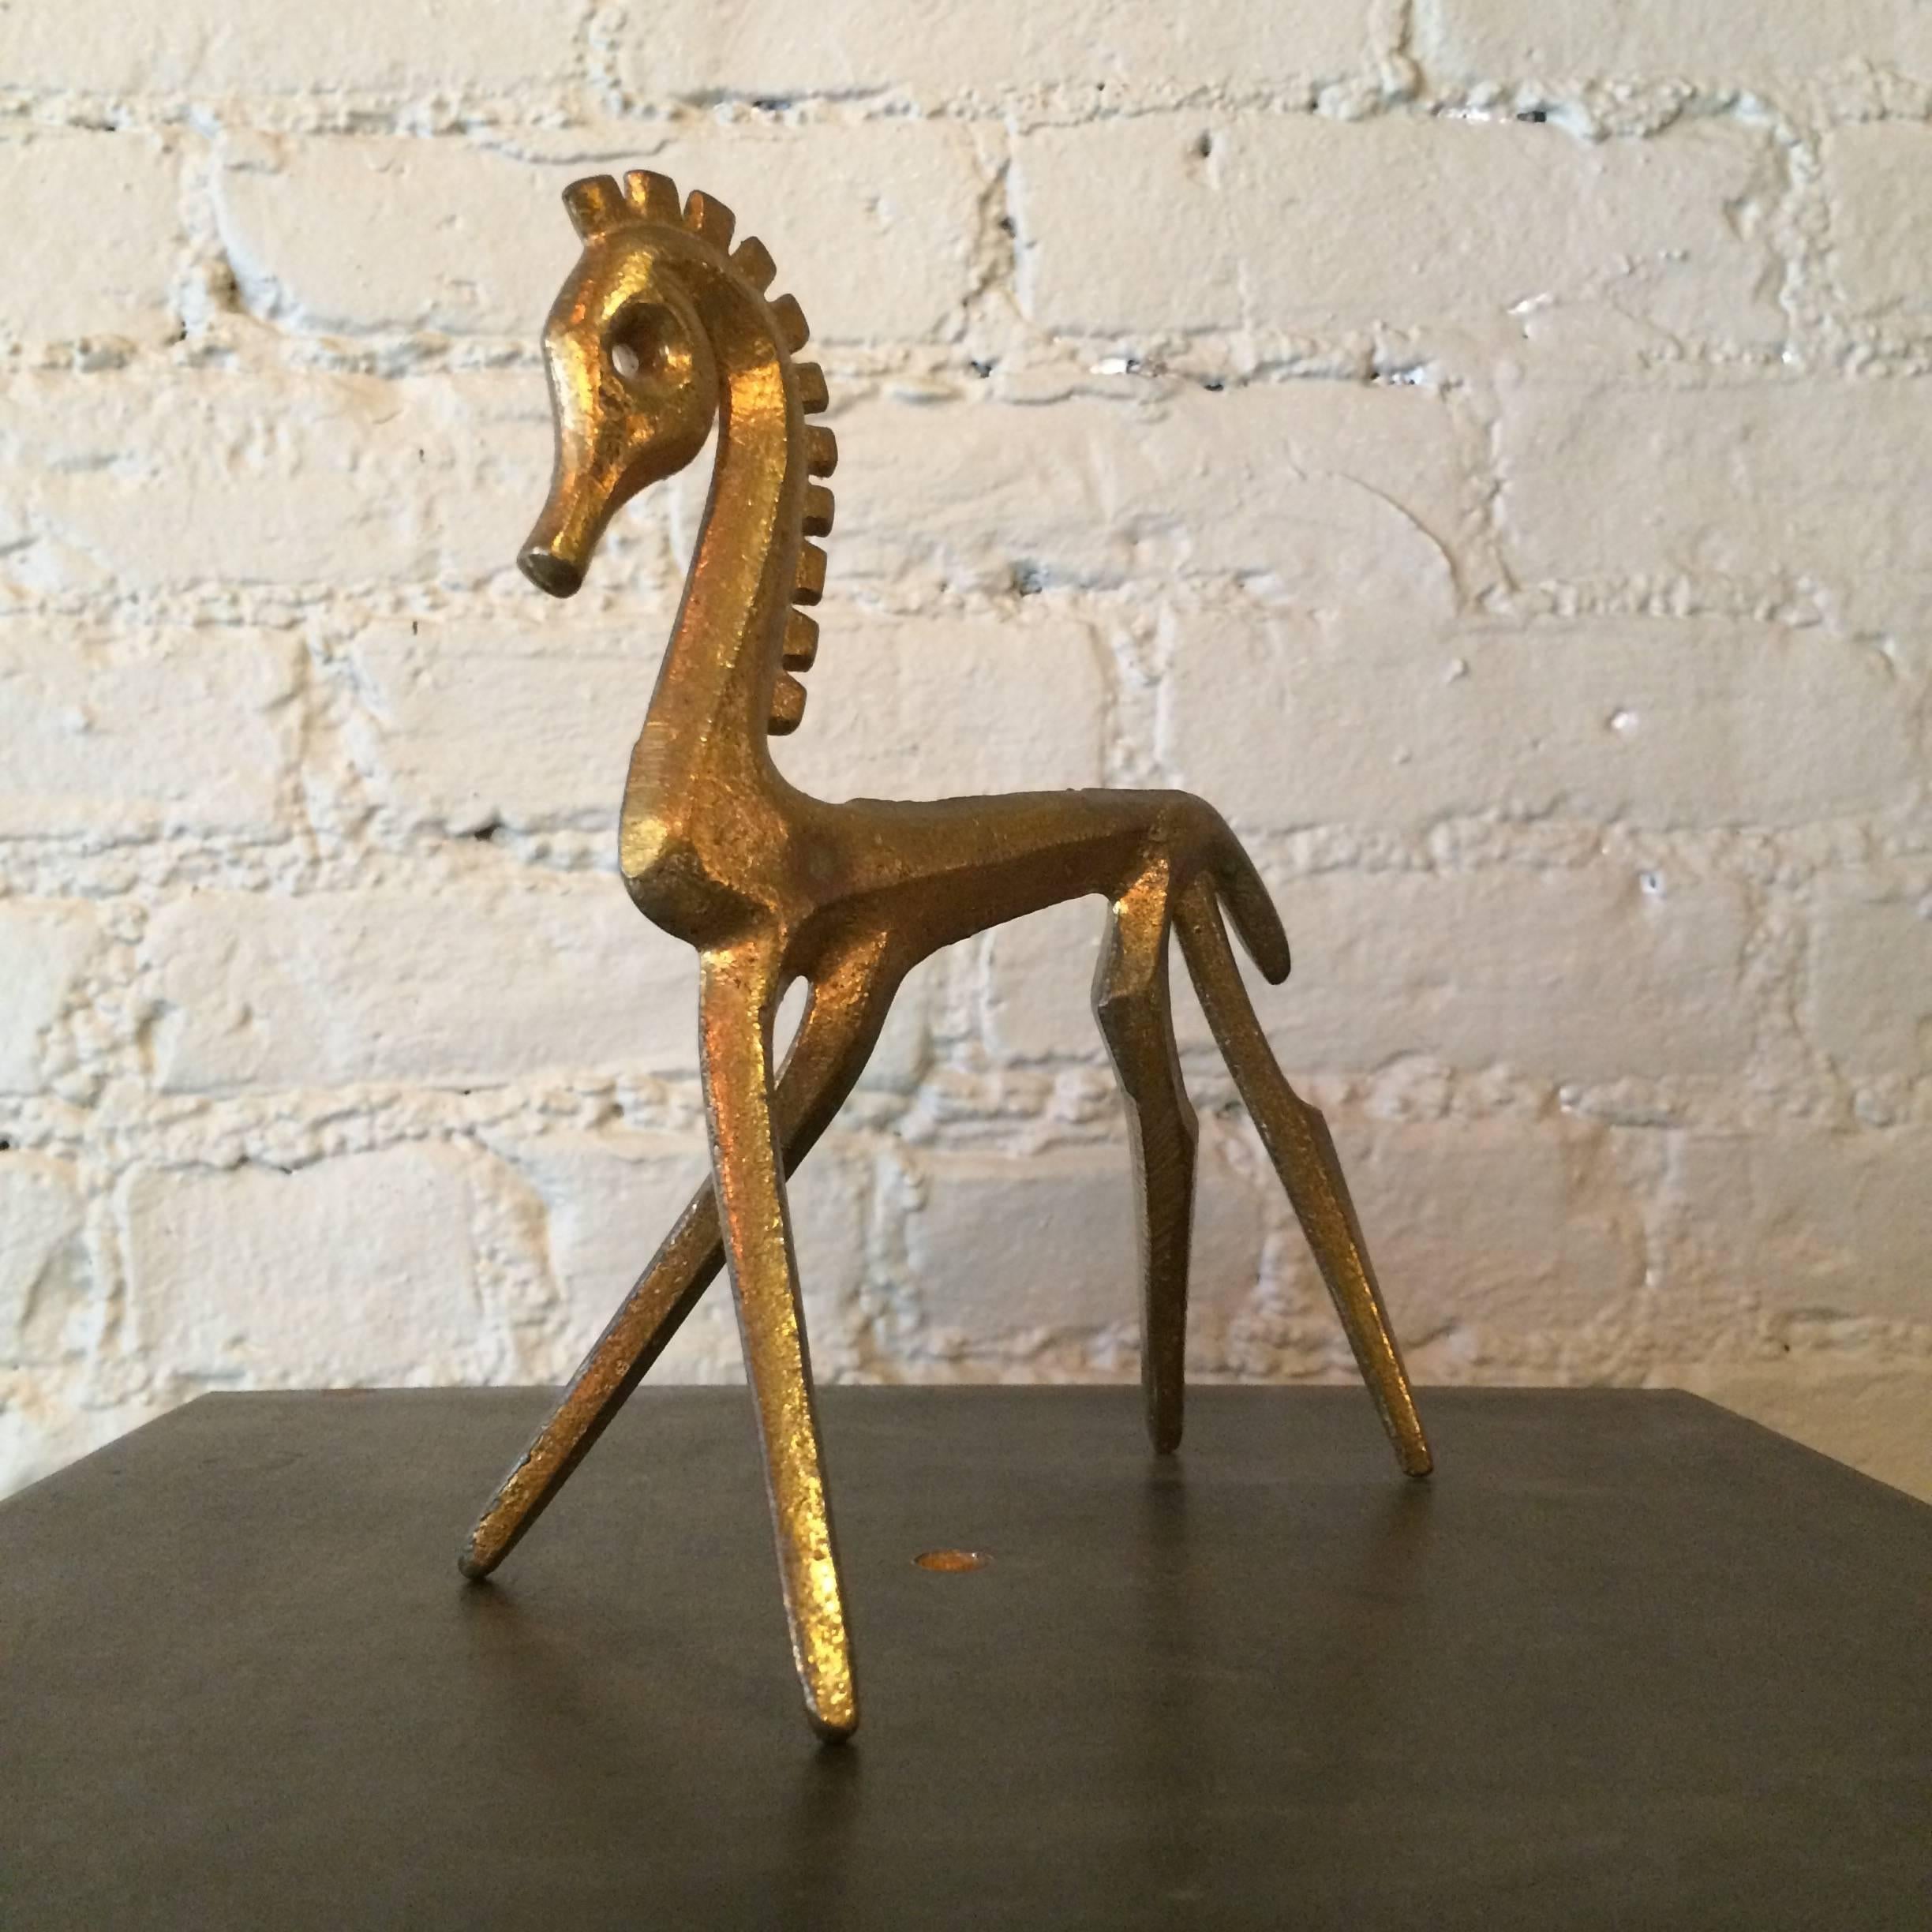 Signed, bronze horse sculpture by Frederick Weinberg.